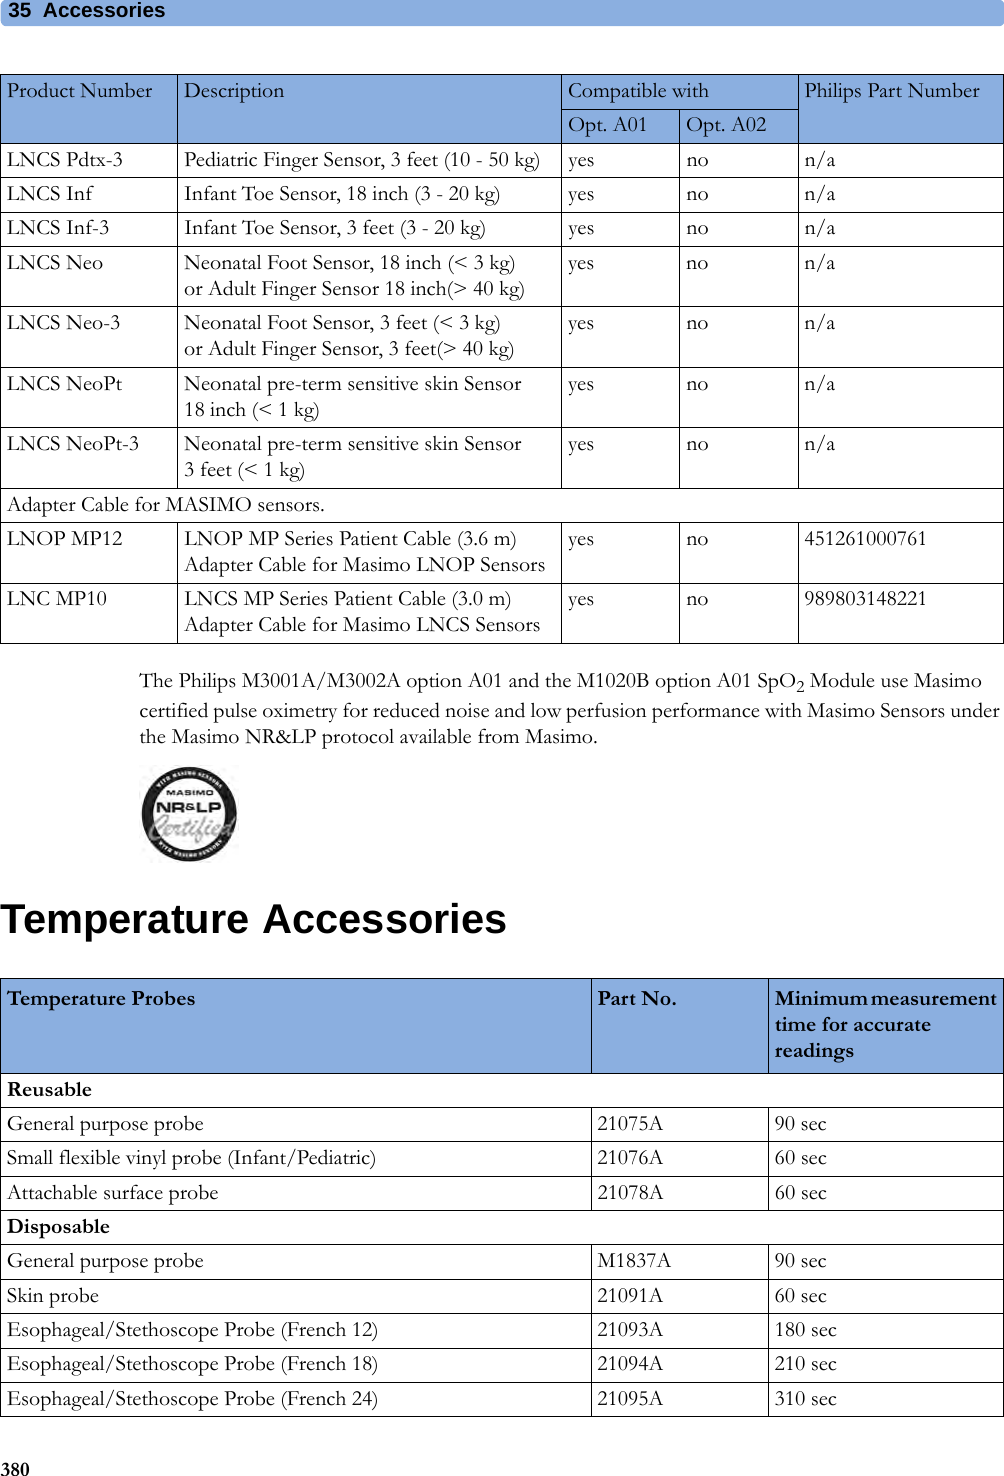 35 Accessories380The Philips M3001A/M3002A option A01 and the M1020B option A01 SpO2 Module use Masimo certified pulse oximetry for reduced noise and low perfusion performance with Masimo Sensors under the Masimo NR&amp;LP protocol available from Masimo.Temperature AccessoriesLNCS Pdtx-3 Pediatric Finger Sensor, 3 feet (10 - 50 kg) yes no n/aLNCS Inf Infant Toe Sensor, 18 inch (3 - 20 kg) yes no n/aLNCS Inf-3 Infant Toe Sensor, 3 feet (3 - 20 kg) yes no n/aLNCS Neo Neonatal Foot Sensor, 18 inch (&lt; 3 kg)or Adult Finger Sensor 18 inch(&gt; 40 kg)yes no n/aLNCS Neo-3 Neonatal Foot Sensor, 3 feet (&lt; 3 kg)or Adult Finger Sensor, 3 feet(&gt; 40 kg)yes no n/aLNCS NeoPt Neonatal pre-term sensitive skin Sensor 18 inch (&lt; 1 kg)yes no n/aLNCS NeoPt-3 Neonatal pre-term sensitive skin Sensor 3 feet (&lt; 1 kg)yes no n/aAdapter Cable for MASIMO sensors.LNOP MP12 LNOP MP Series Patient Cable (3.6 m) Adapter Cable for Masimo LNOP Sensorsyes no 451261000761LNC MP10 LNCS MP Series Patient Cable (3.0 m) Adapter Cable for Masimo LNCS Sensorsyes no 989803148221Product Number Description Compatible with Philips Part NumberOpt. A01 Opt. A02Temperature Probes Part No. Minimum measurement time for accurate readingsReusableGeneral purpose probe 21075A 90 secSmall flexible vinyl probe (Infant/Pediatric) 21076A 60 secAttachable surface probe 21078A 60 secDisposableGeneral purpose probe M1837A 90 secSkin probe 21091A 60 secEsophageal/Stethoscope Probe (French 12) 21093A 180 secEsophageal/Stethoscope Probe (French 18) 21094A 210 secEsophageal/Stethoscope Probe (French 24) 21095A 310 sec